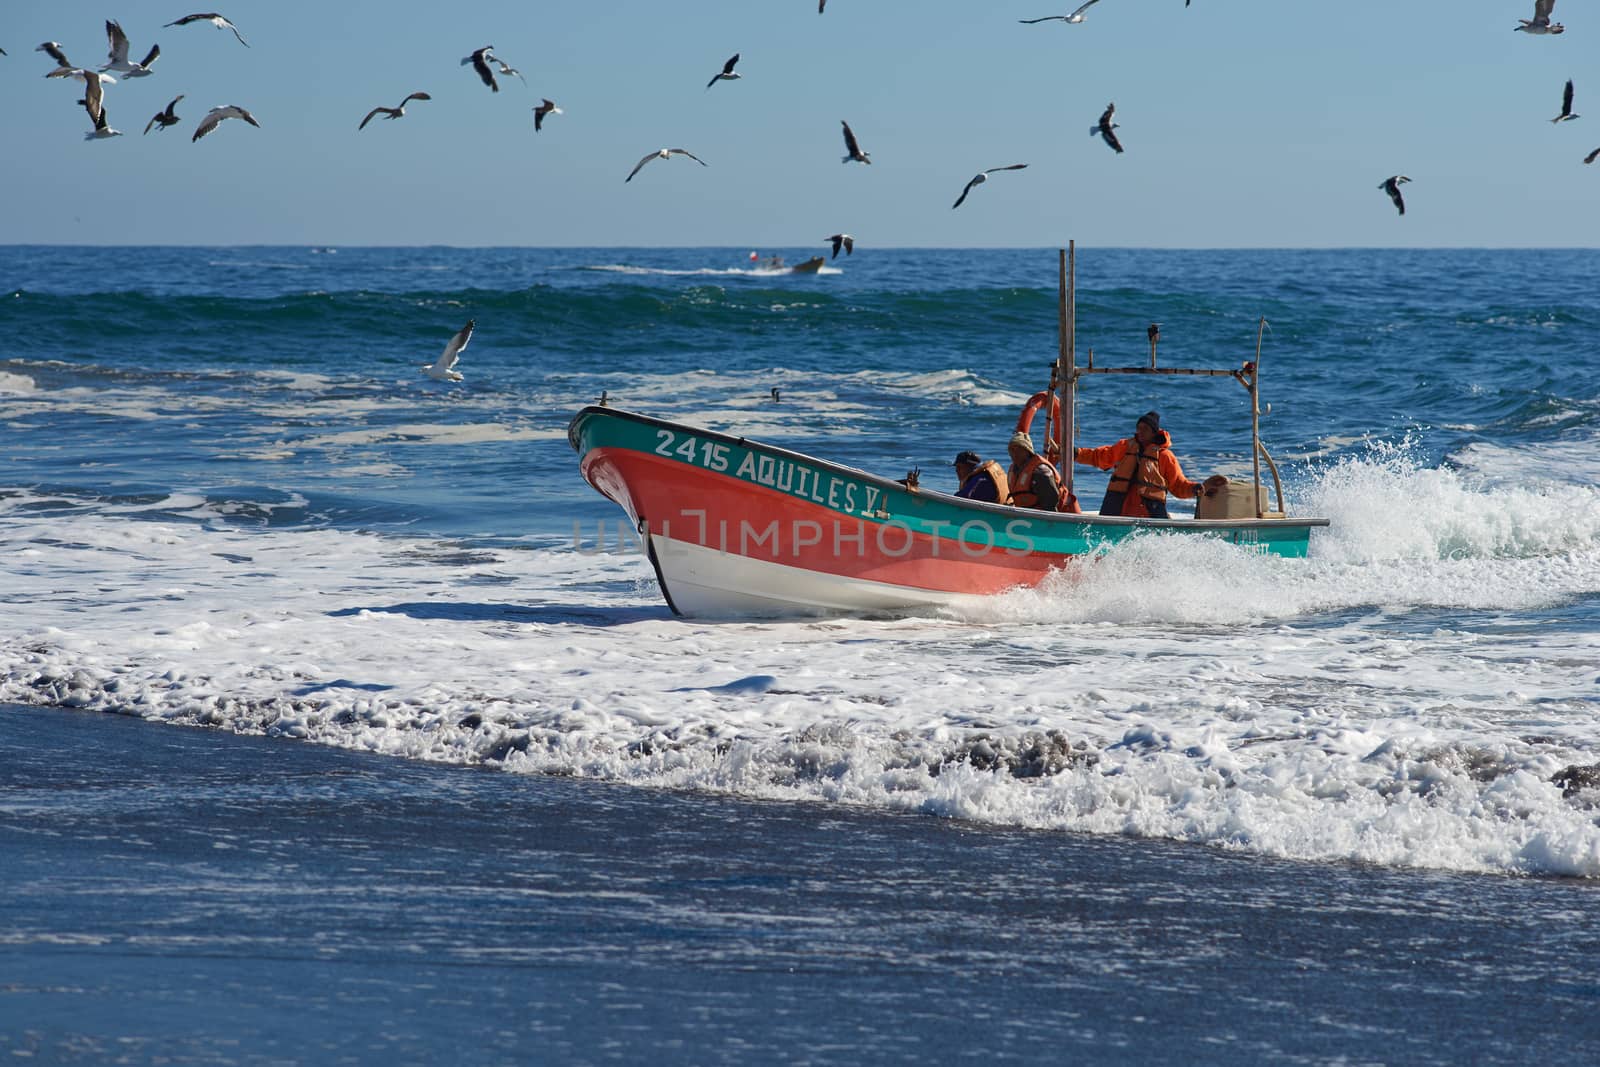 Fishing boat coming ashore on the sandy beach in the fishing village of Curanipe, Chile. Once the boats are beached on the sand, a tractor is used to pull the boats to safer ground.